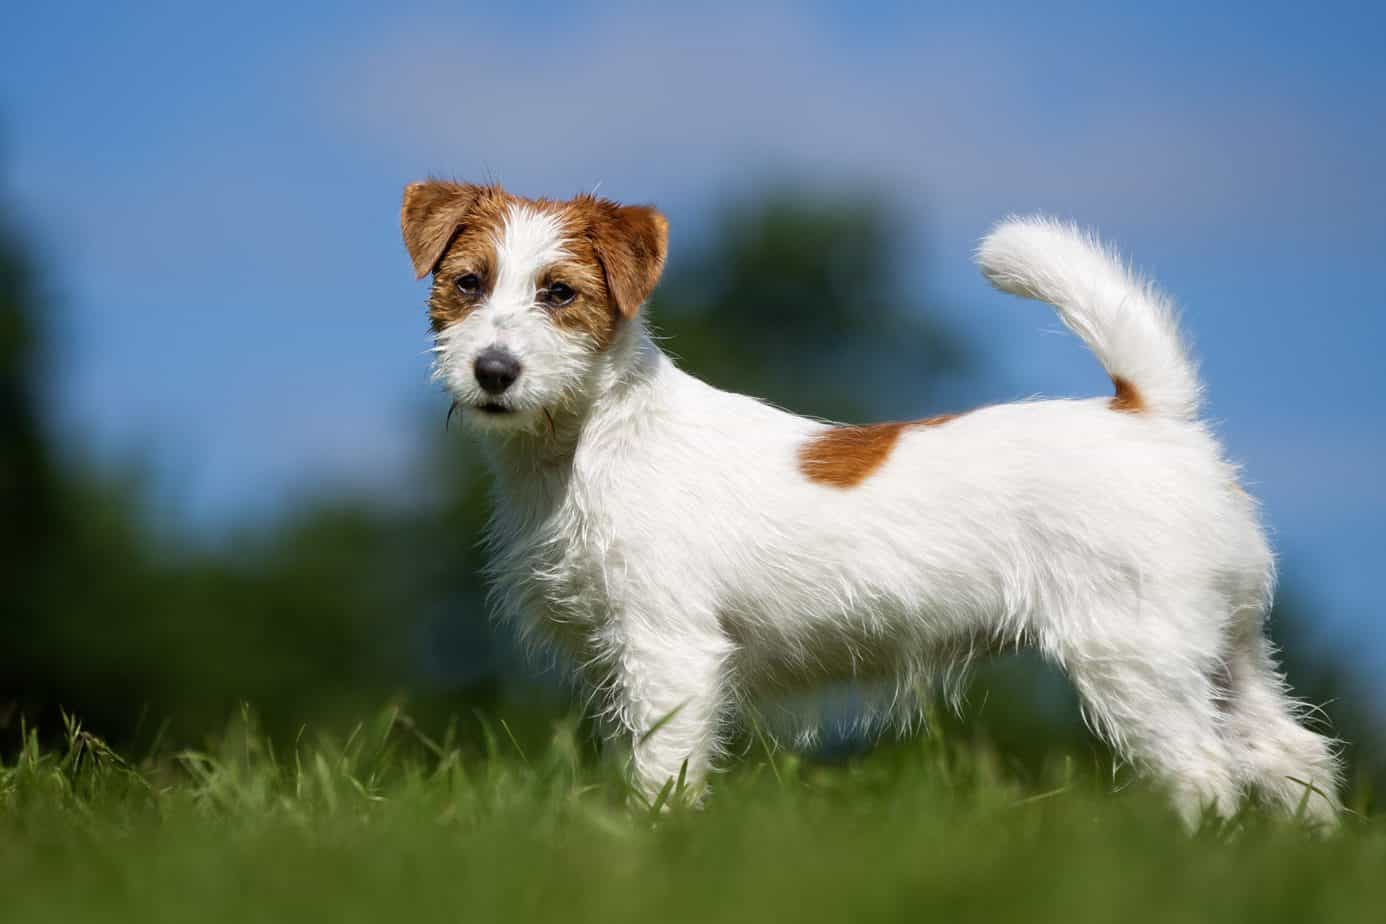 This 🐕 Dog Breeds Quiz May Be a Liiiittle Challenging, But Let’s See If You Can Score 15/20 Jack Russell Terrier